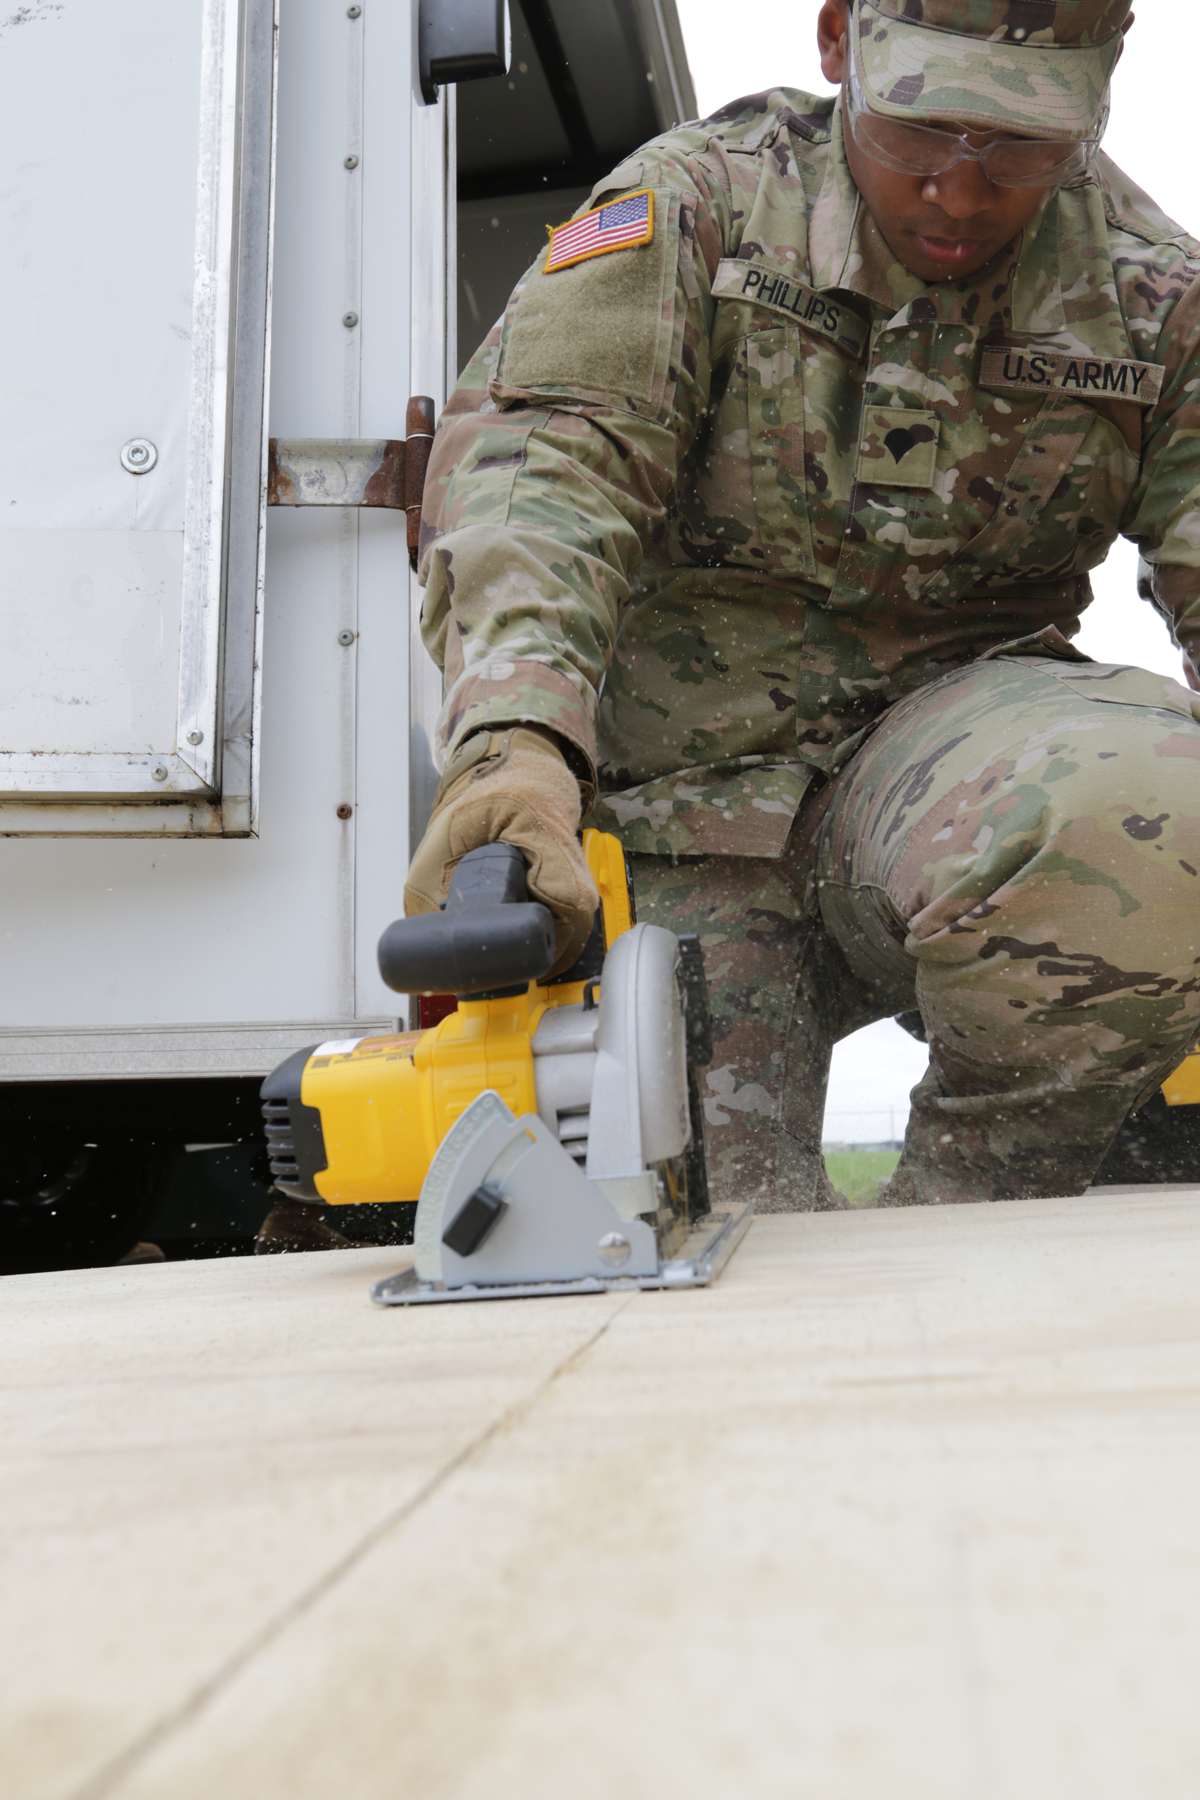 Soldier cutting plywood.